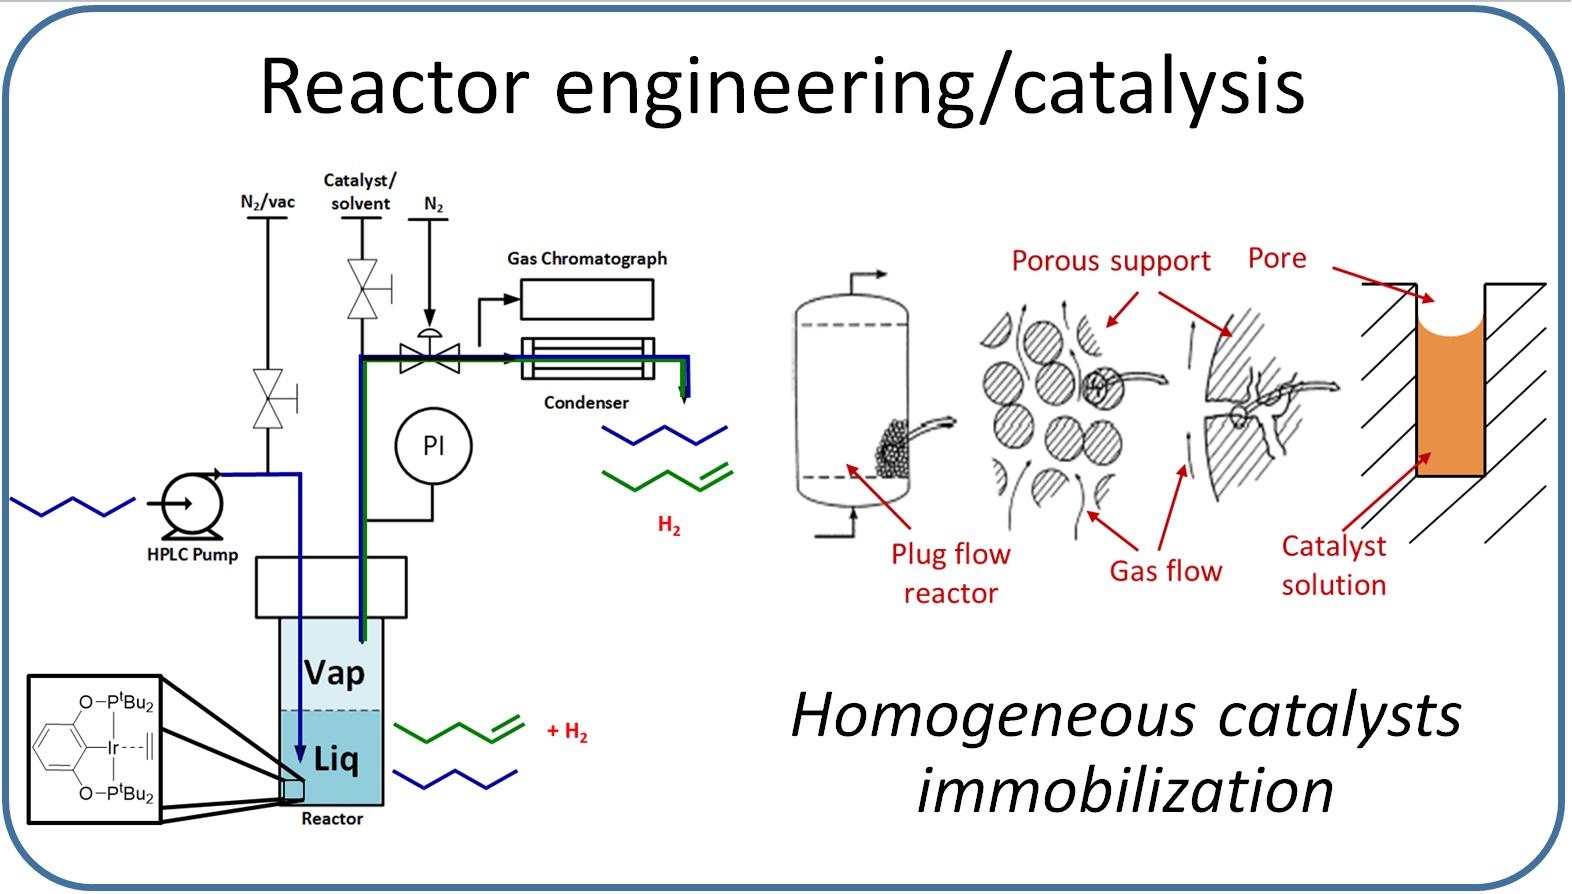 Our goal is to implement novel heterogenization methodologies by combining recent developments in organometallics catalysis with simple reactor engineering. These systems will enable in-depth kinetic studies, thus providing detailed mechanistic insight which will be leveraged to design next generation catalysts.